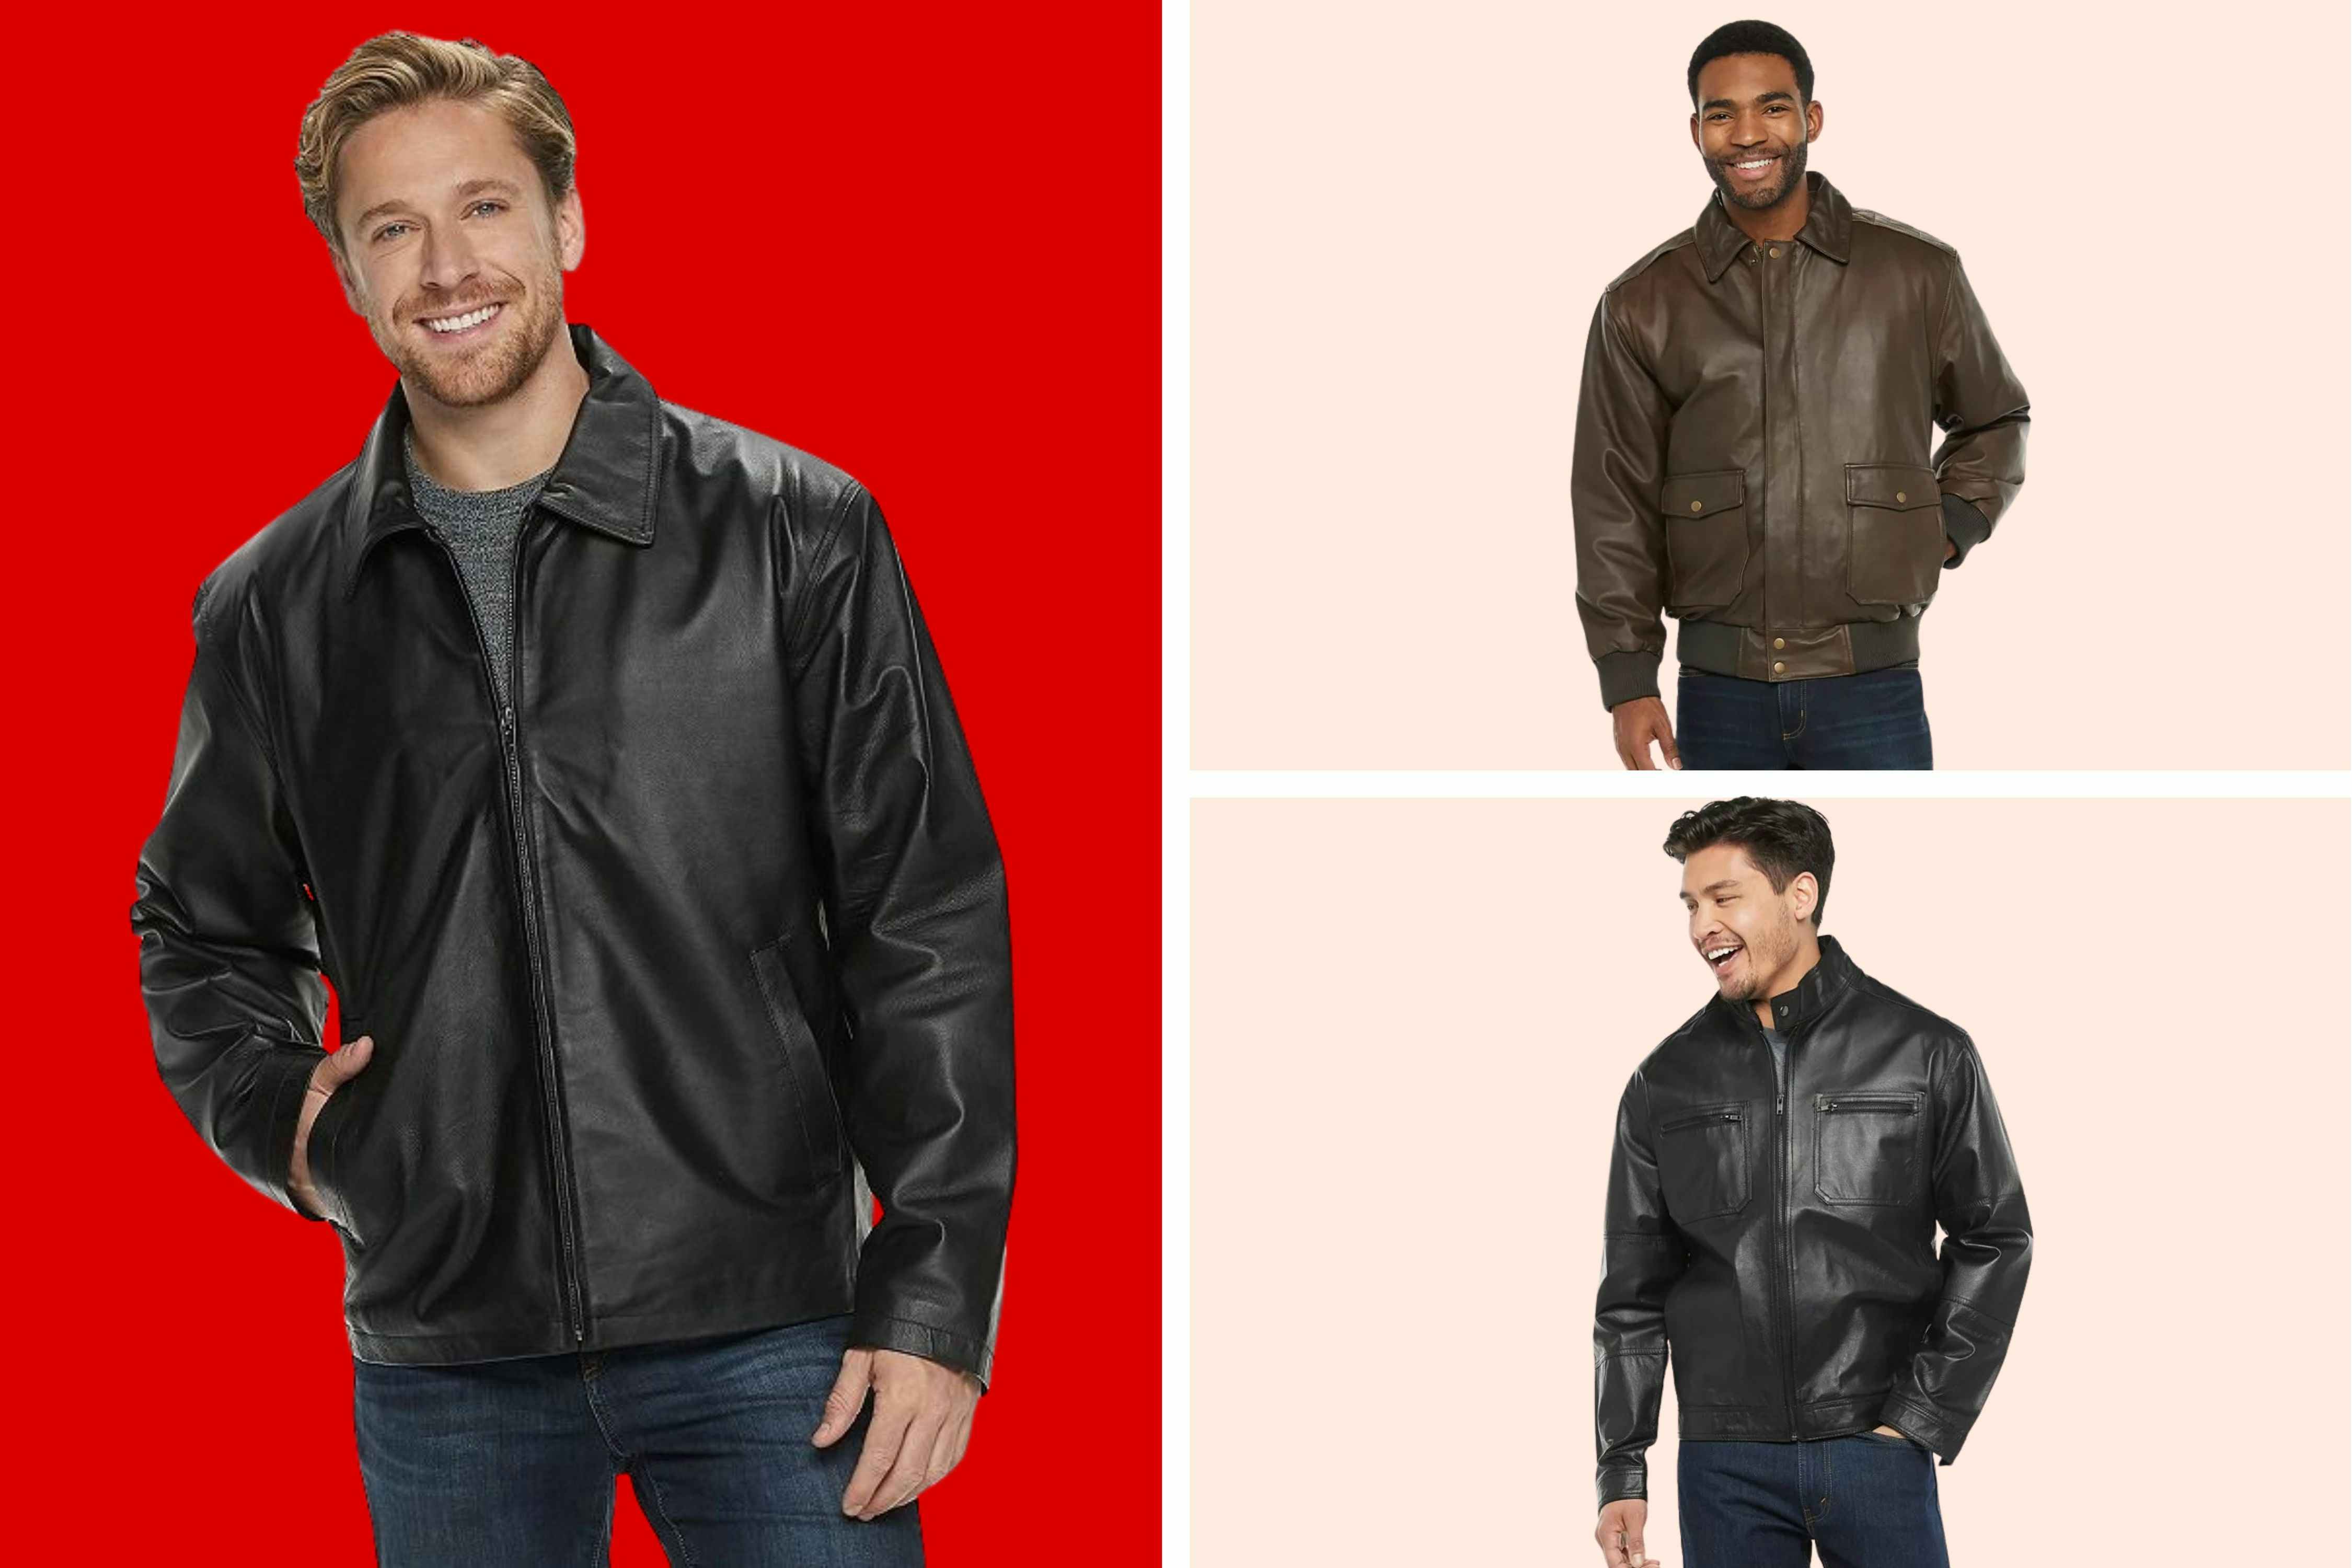 Men's Leather Jackets, as Low as $100 After Kohl's Cash (Reg. $250+)